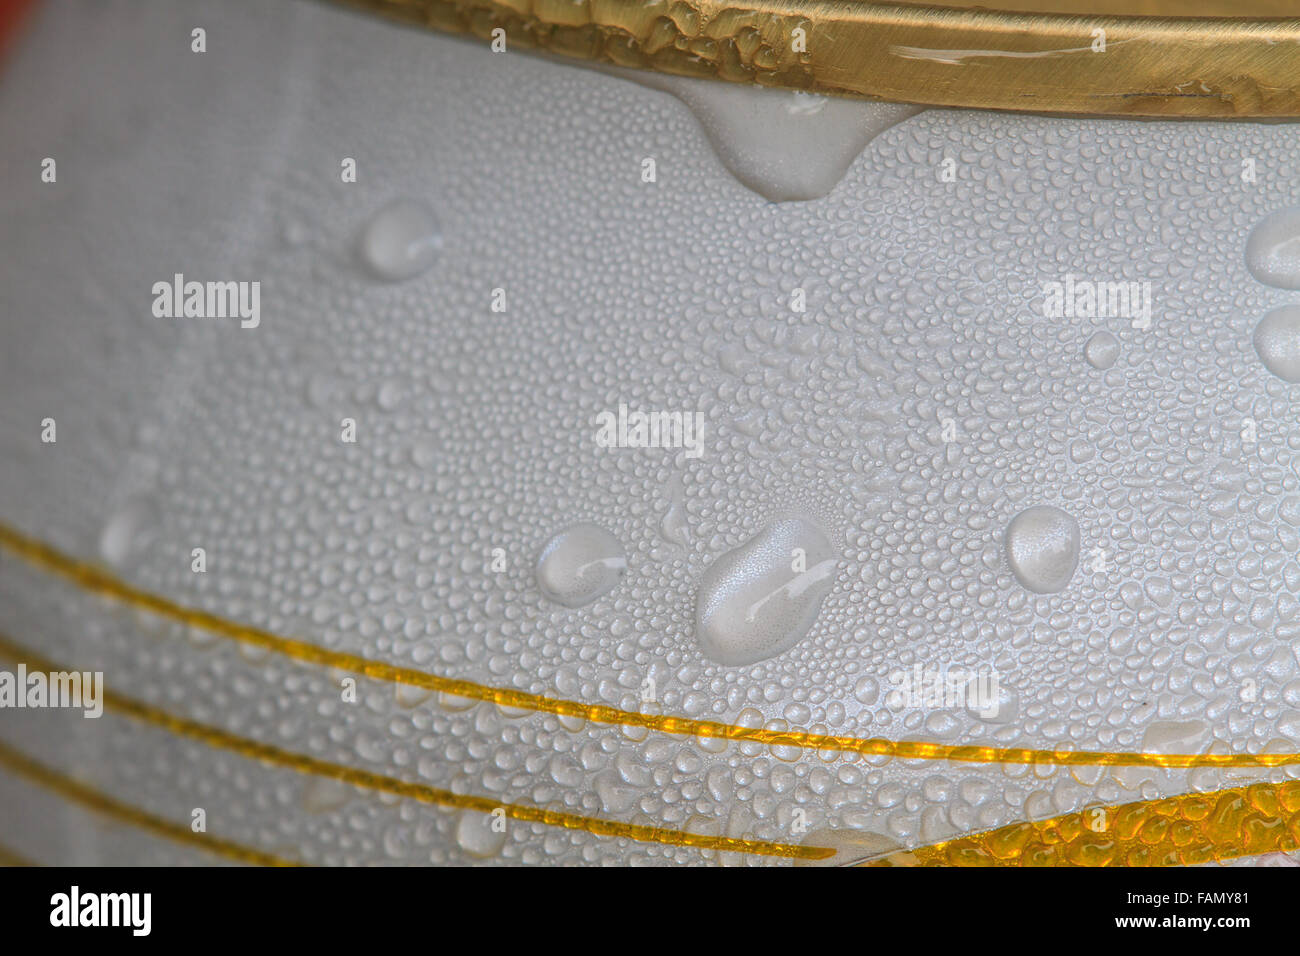 aluminum can with water drops close up Stock Photo